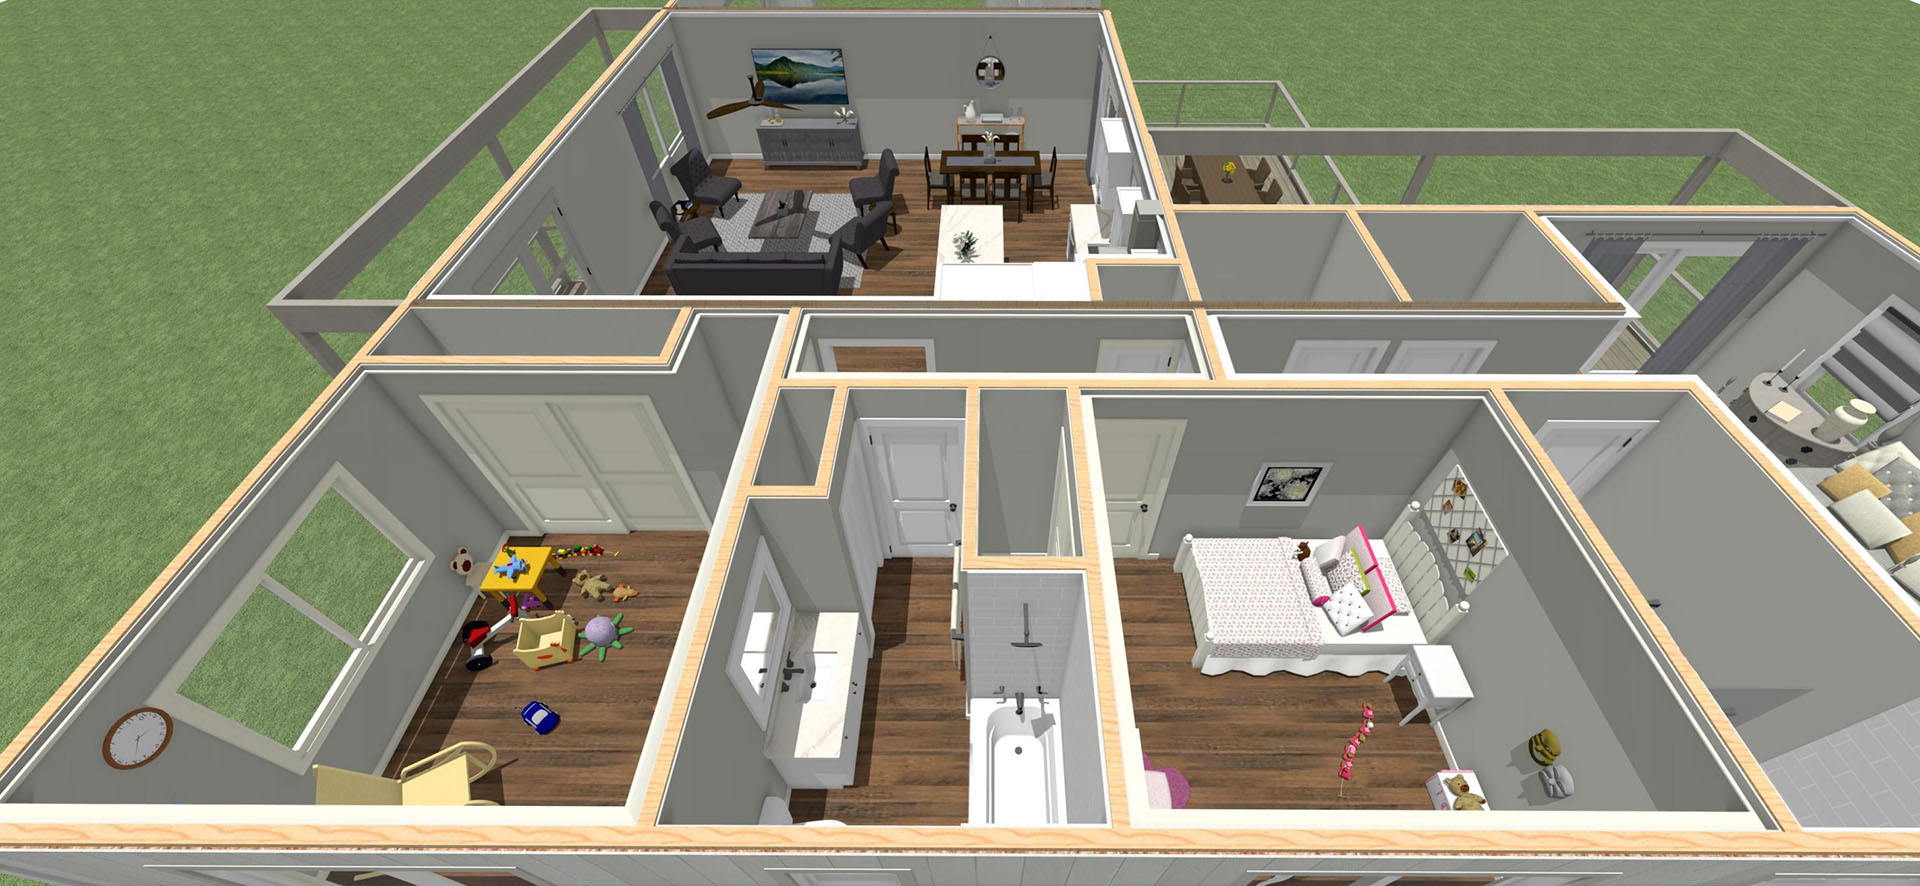 Haouli Floor plan view of house